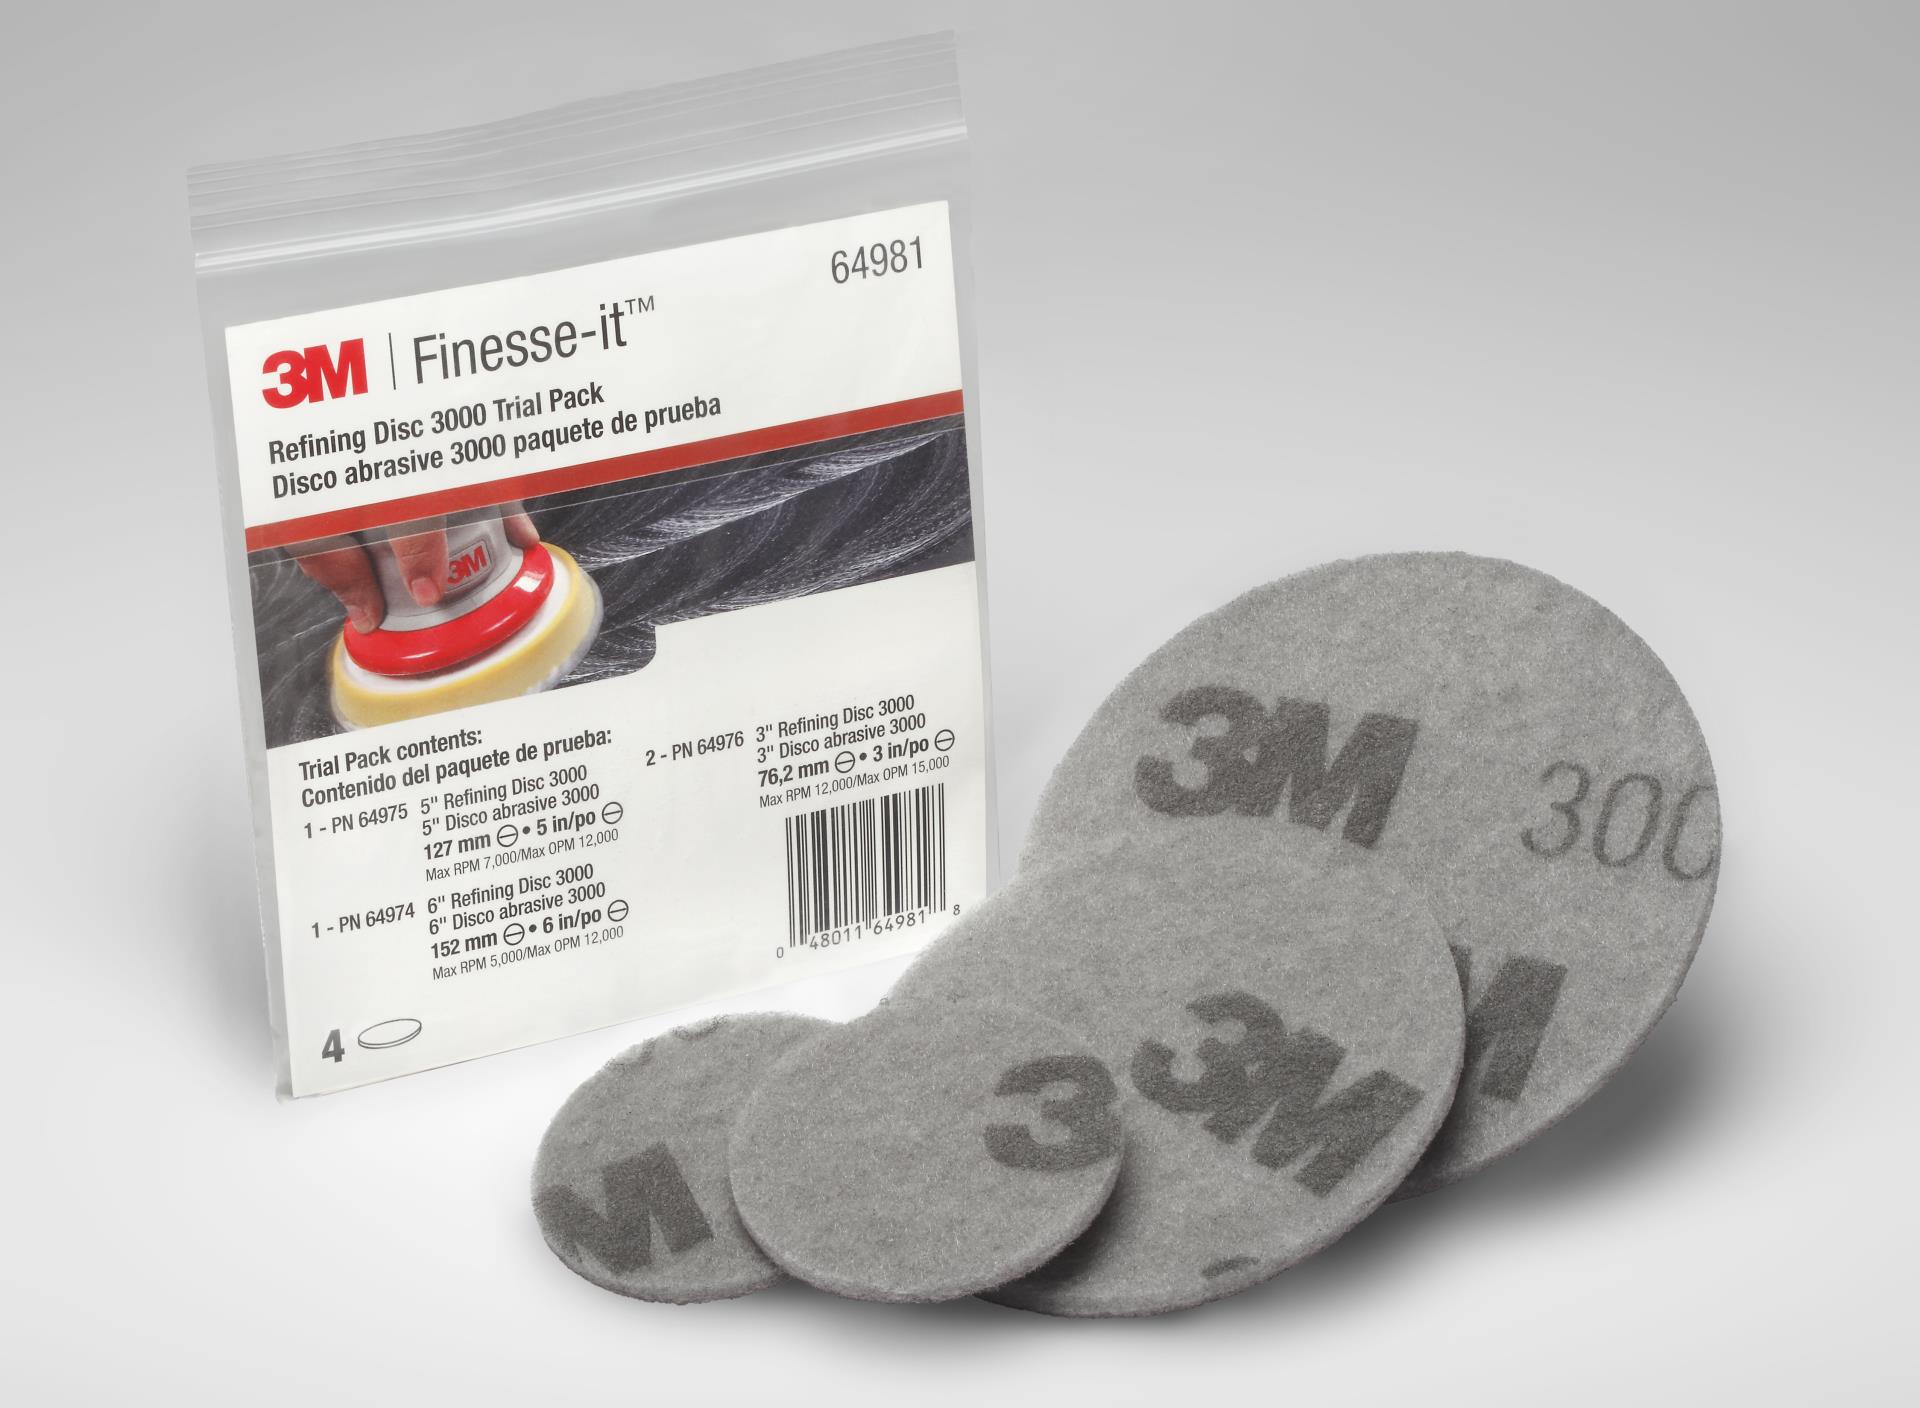 00048011649818 3M™ Finesse-it™ Refining Disc 3000, 64981, (1) in disc  (1) in disc (2) in disc, Multi Pack, 20 packs per case Aircraft  products nonwoven-discs 9376451